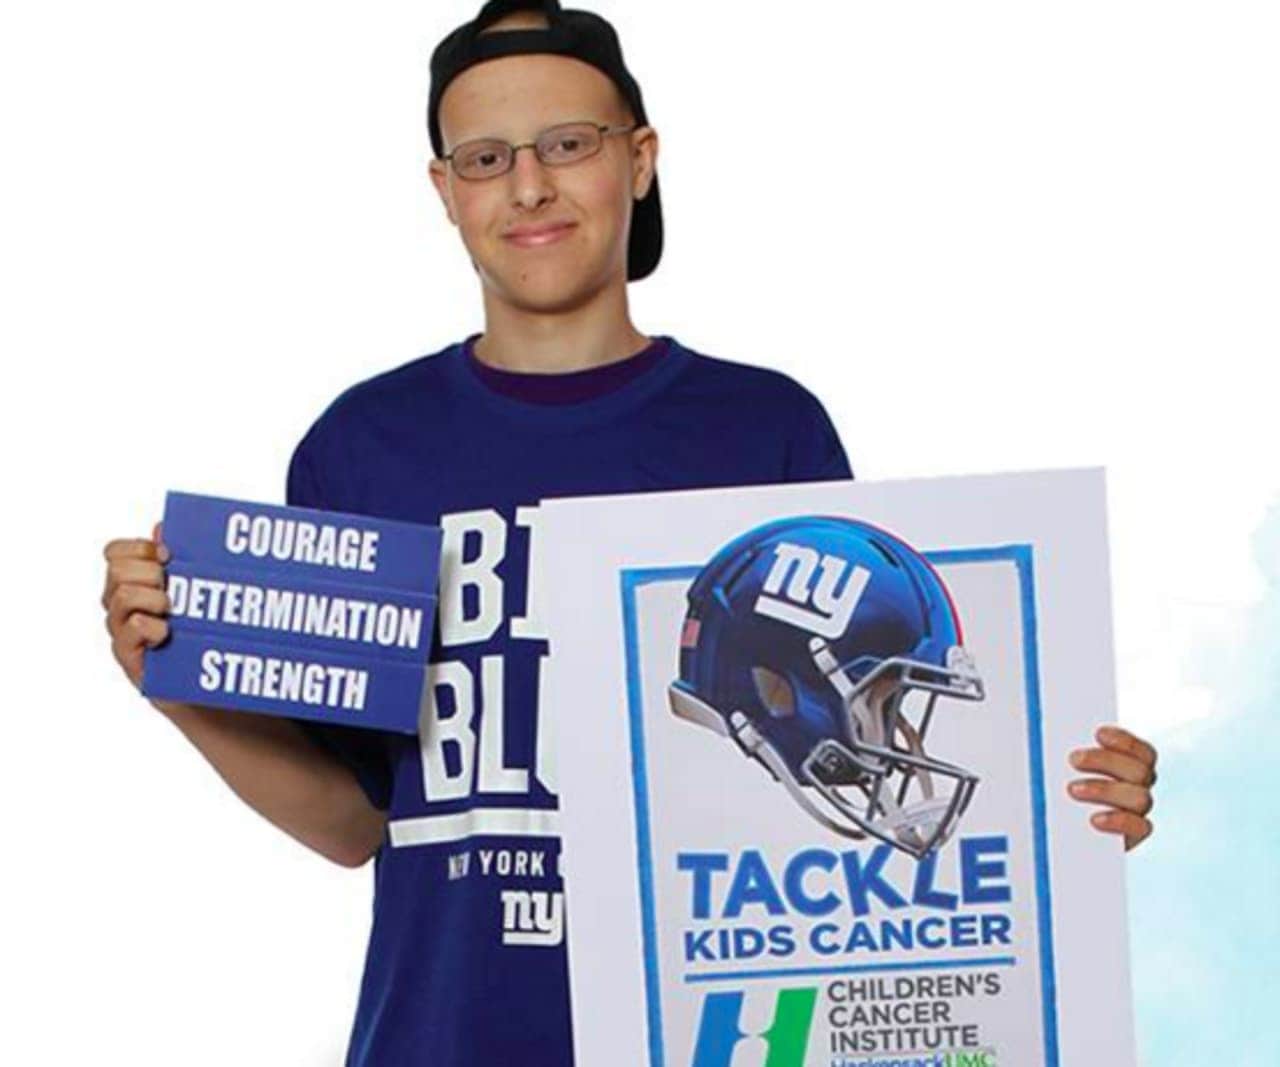 Tackle Kids Cancer with the Fair Lawn Jewish Center.